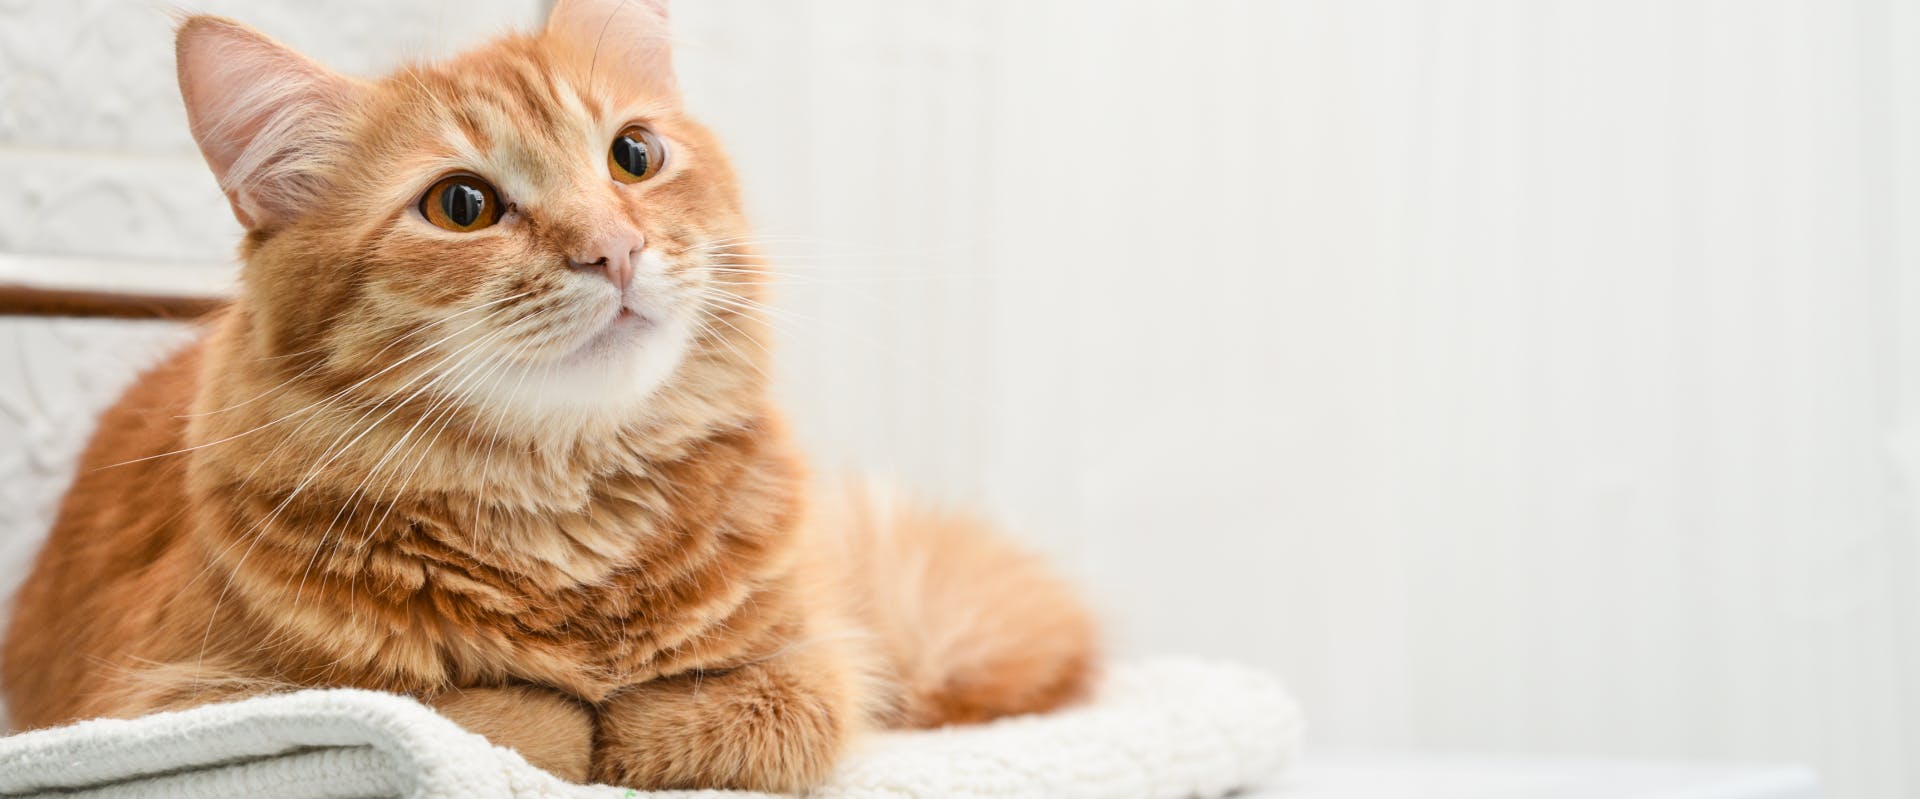 a ginger cat sitting on a white towel with its front paws folded in an looking off behind the camera to the right